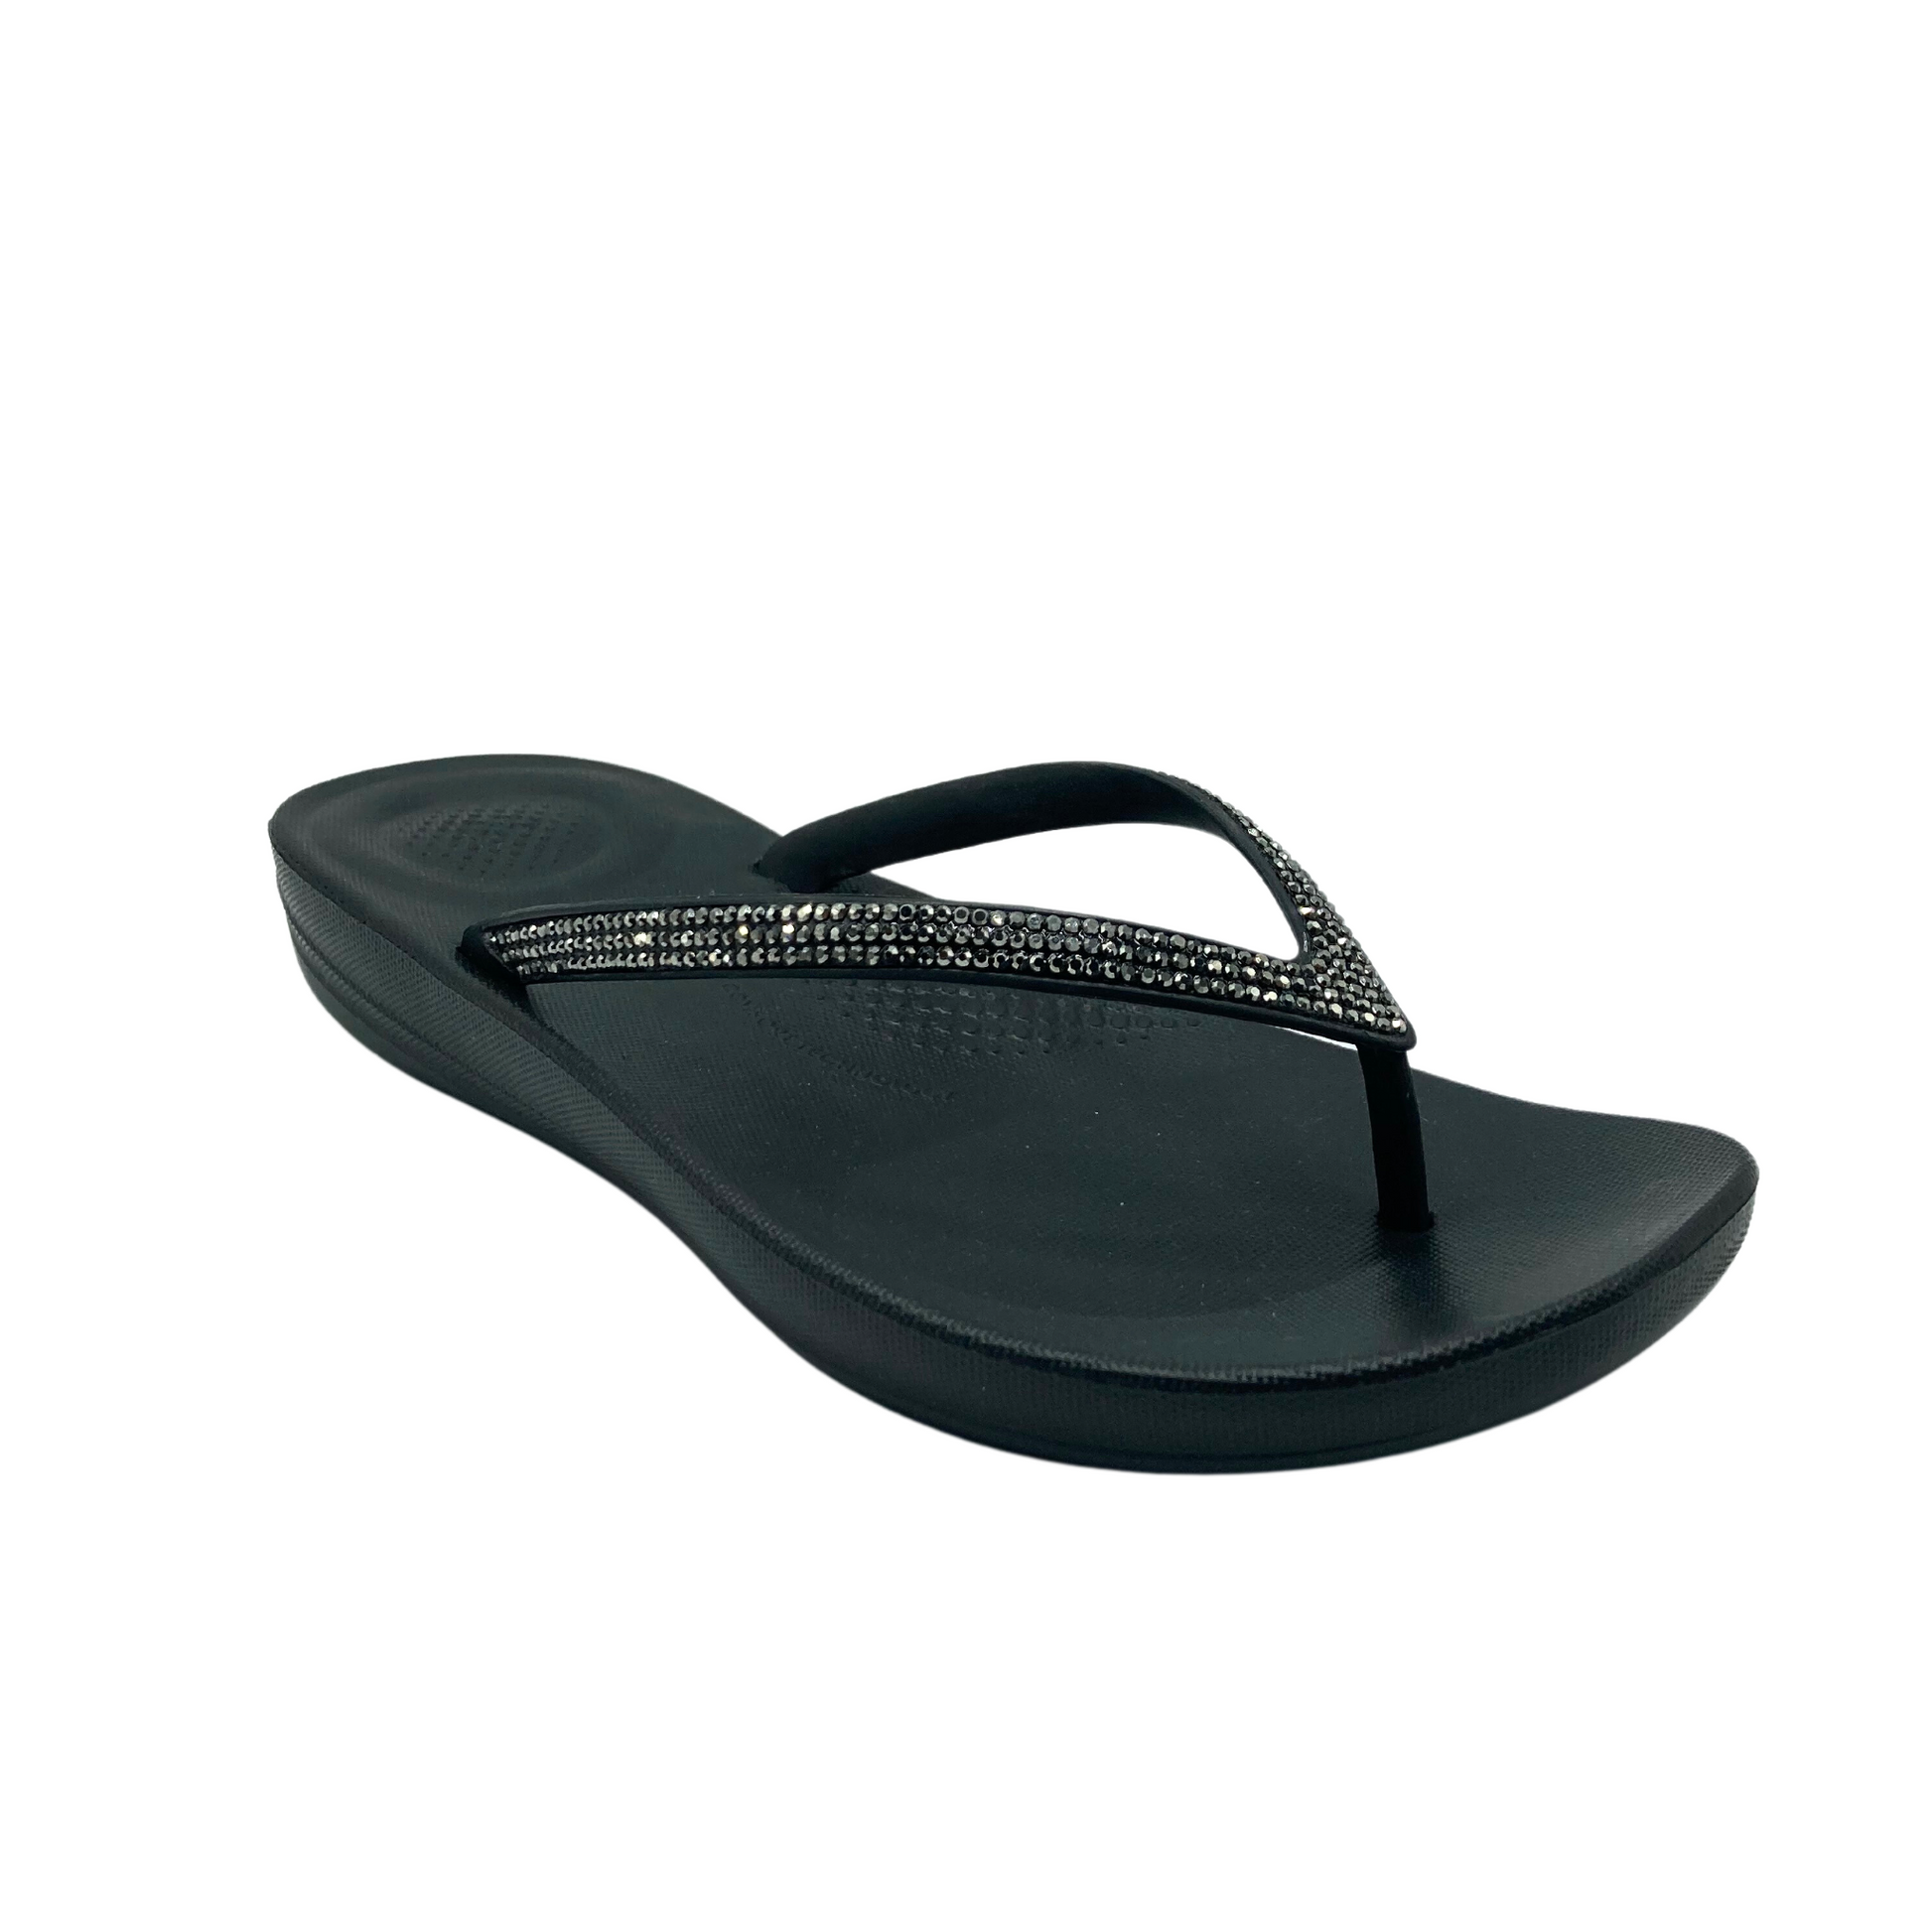 Angled front view of a black Fit Flop sandal with toe post.  Straps have crystals in them.  Ergonomic footbed